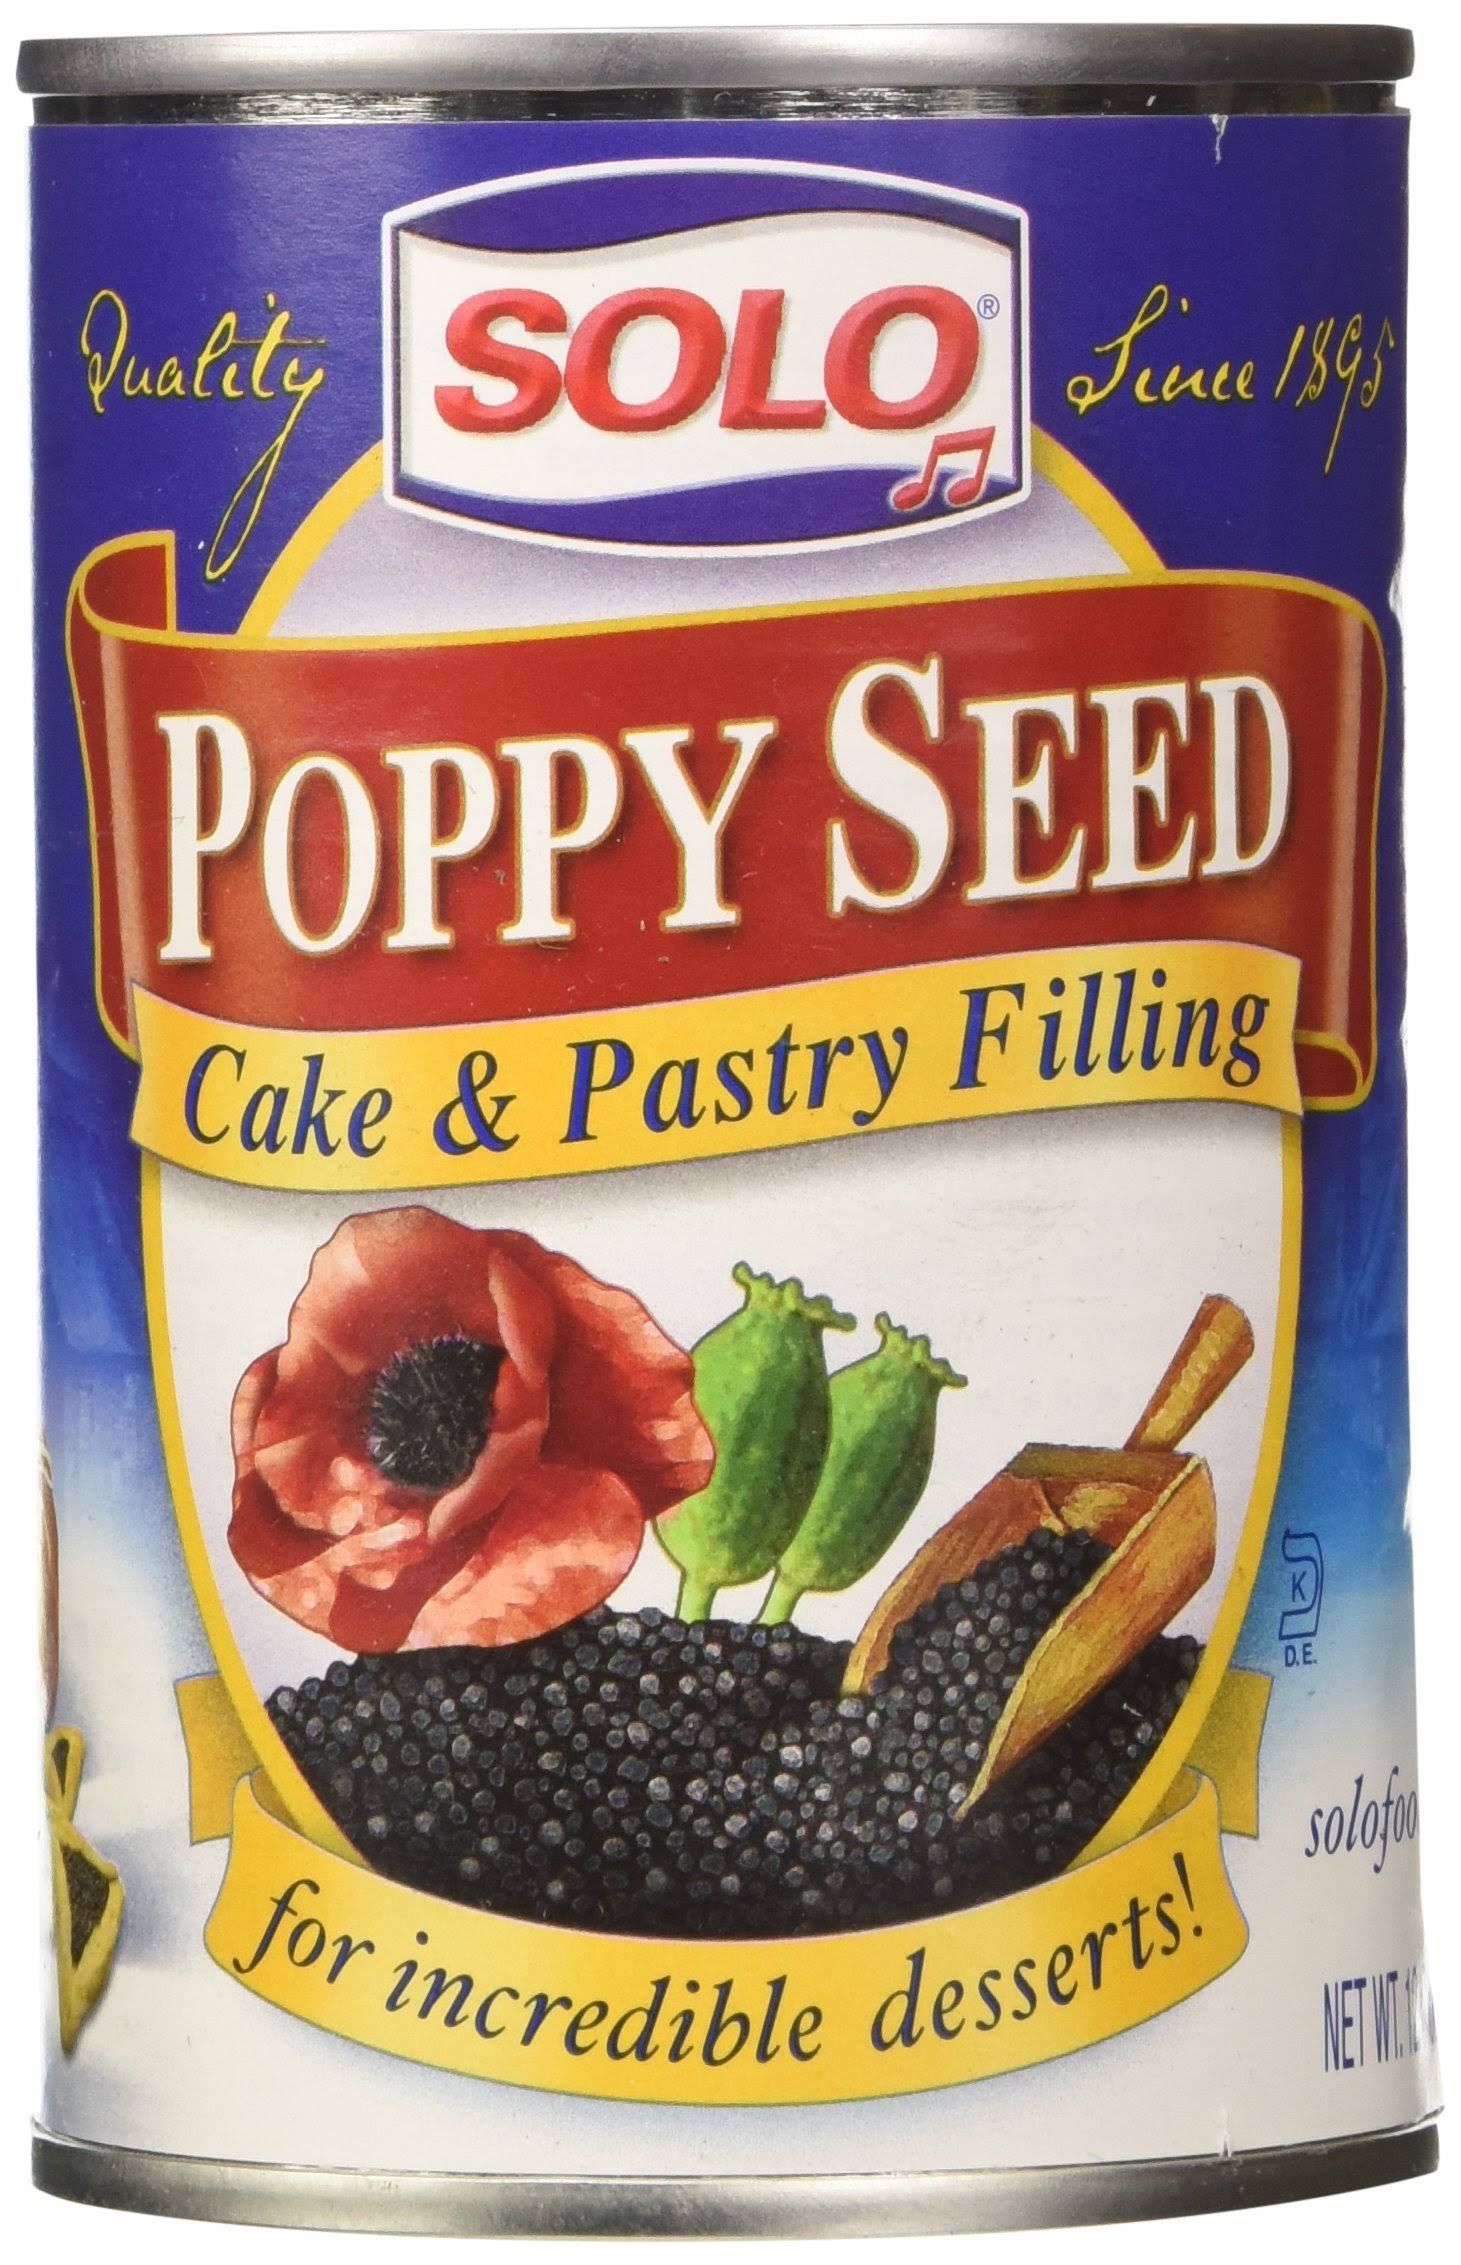 Solo Cake and Pastry Filling Poppy Seed - 12.5oz